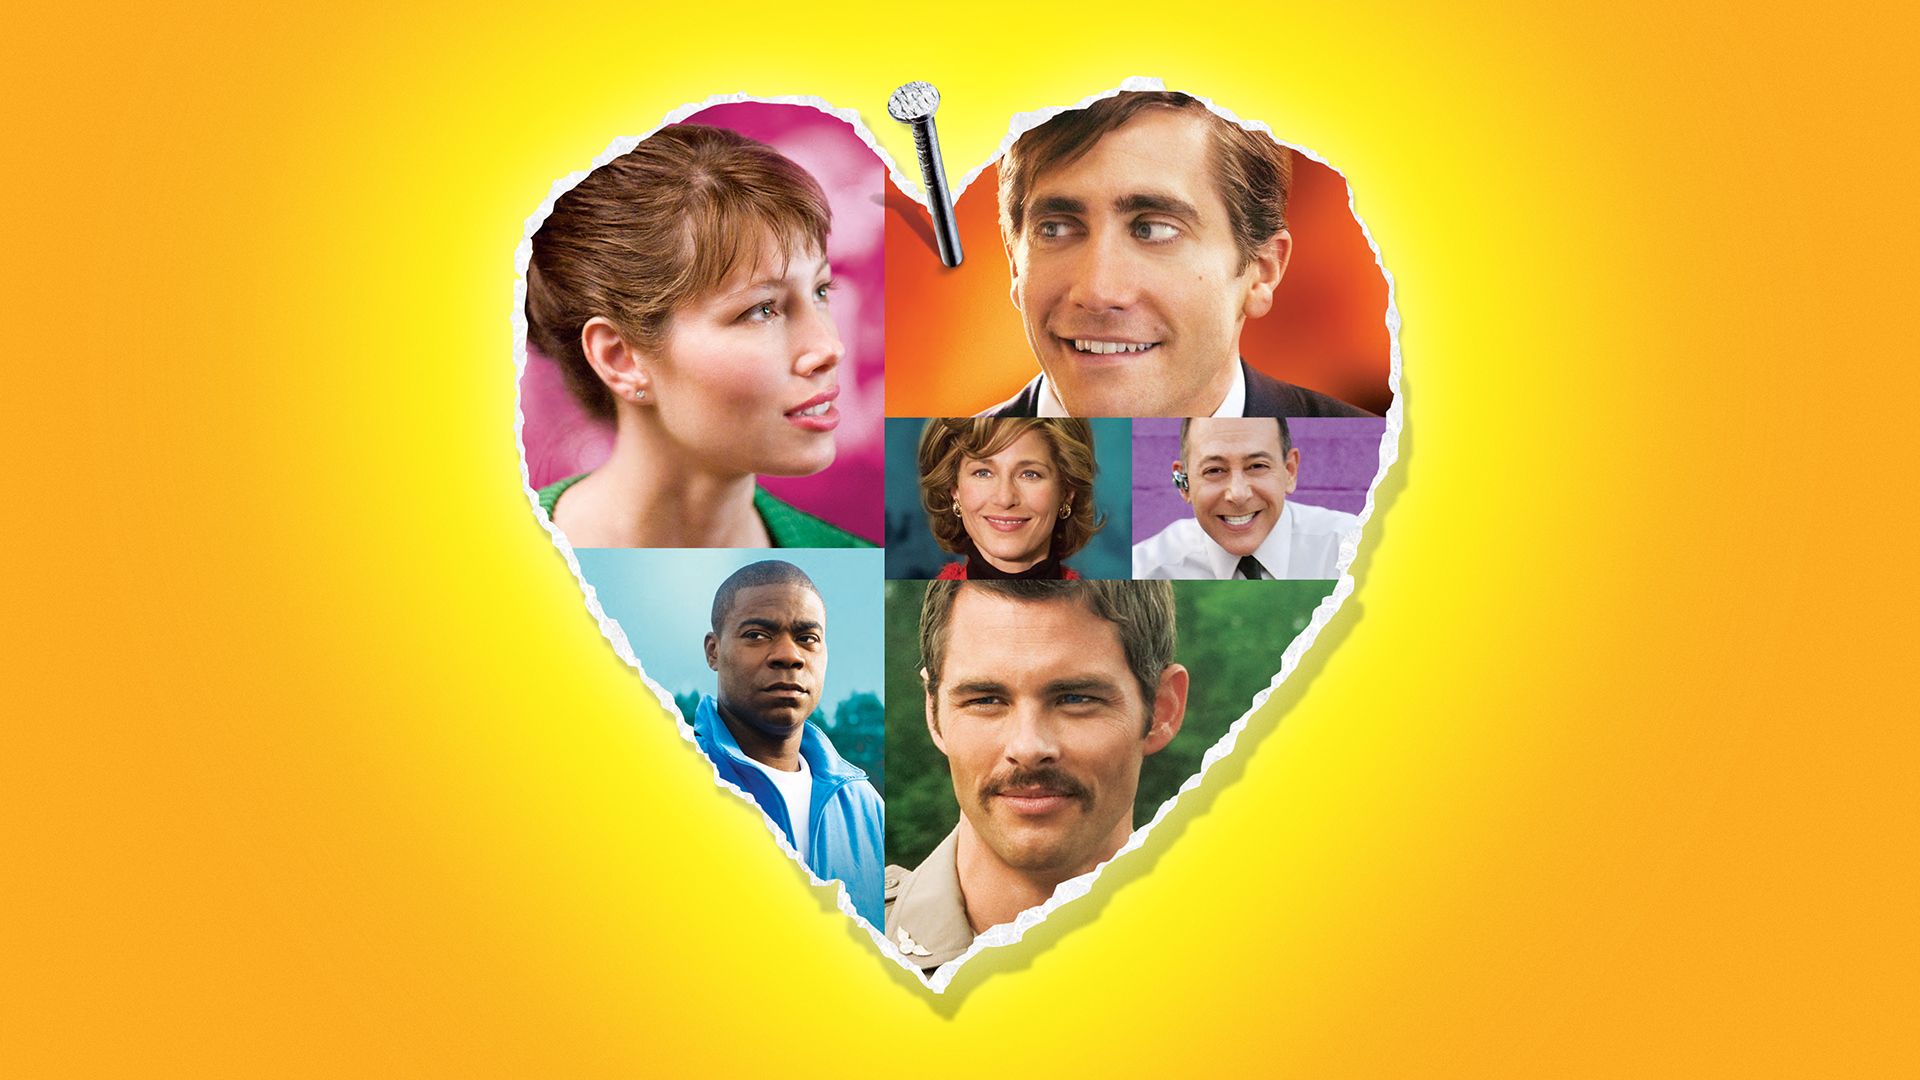 Accidental Love background